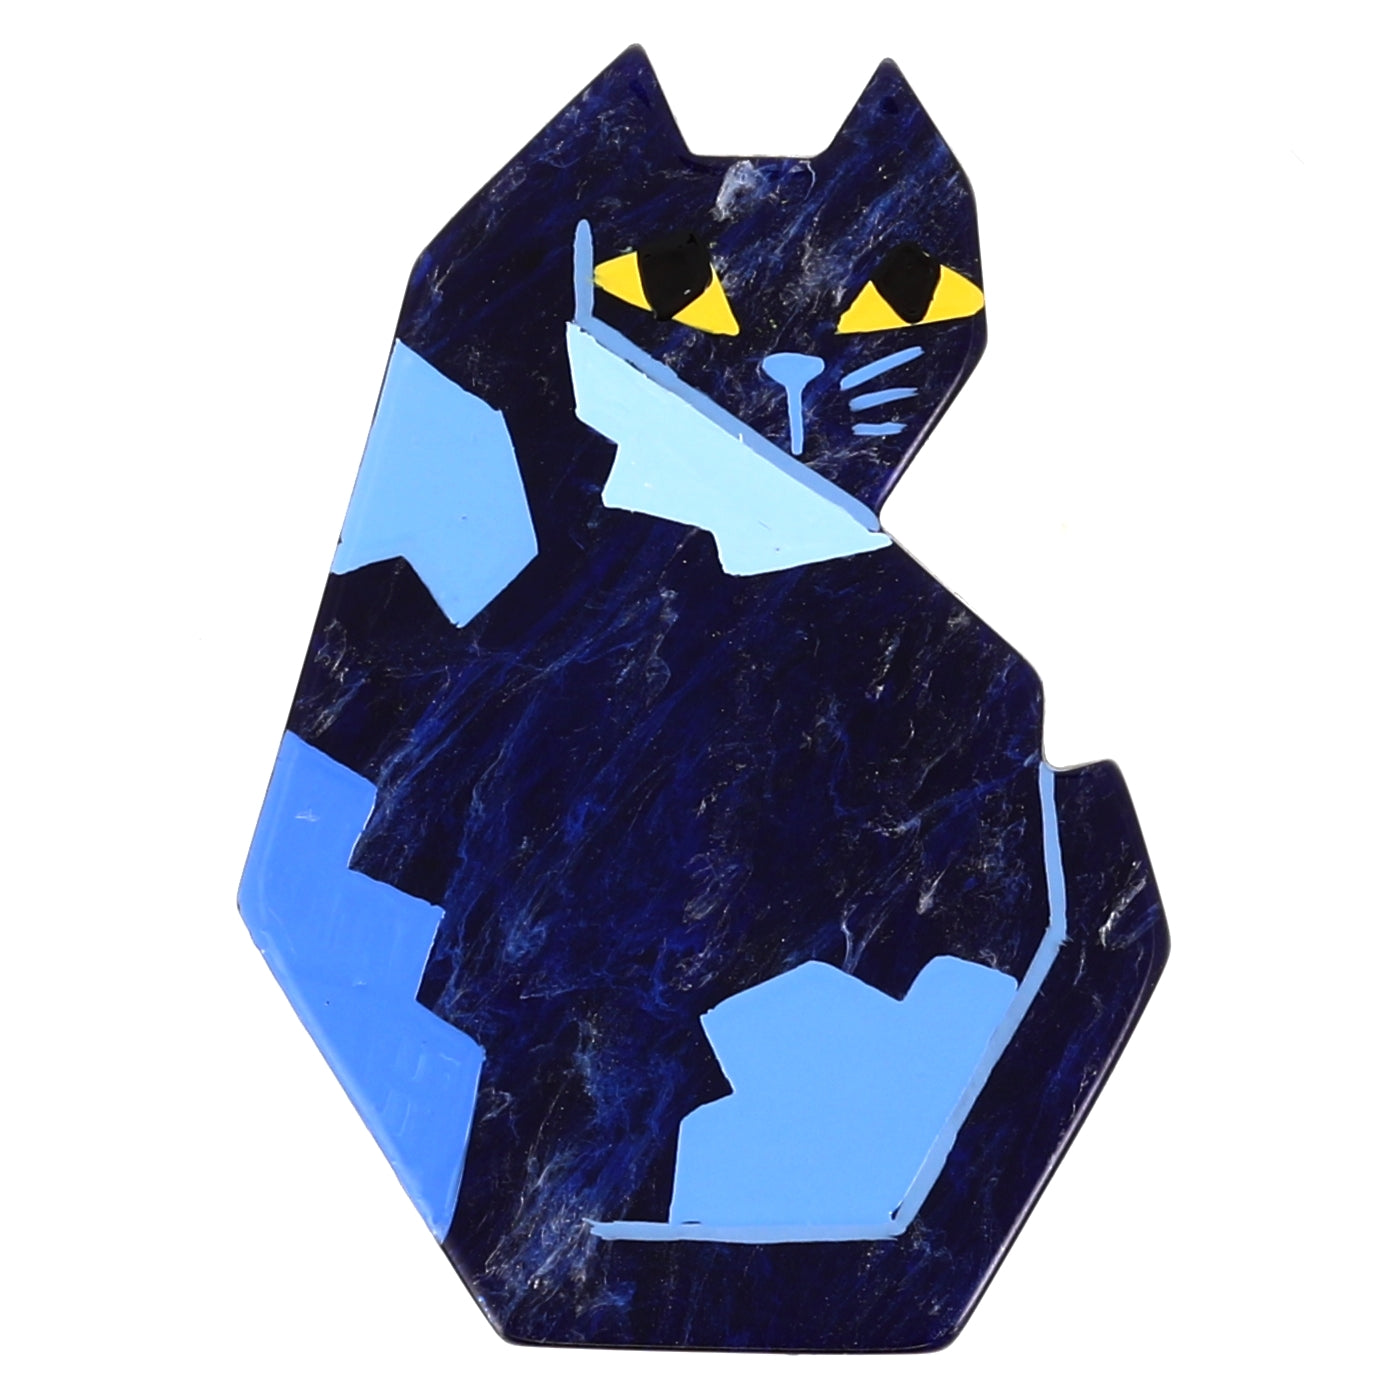 Veined Blue B10 Cat Brooch in galalith